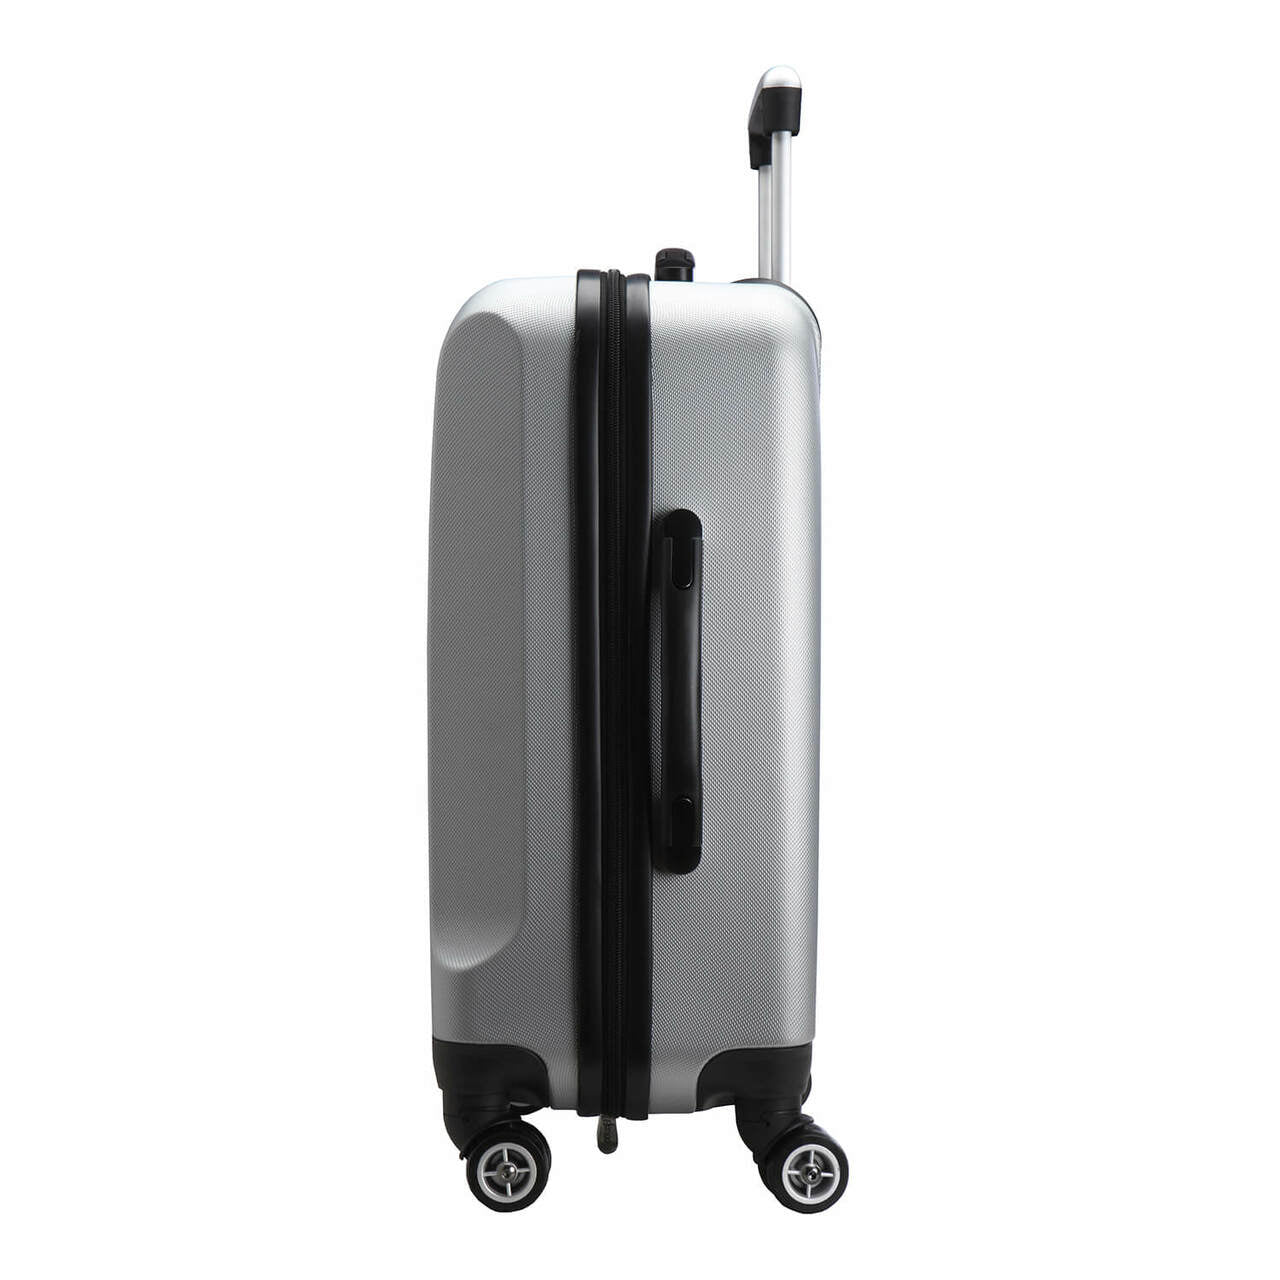 Chicago Cubs 20" Silver Domestic Carry-on Spinner